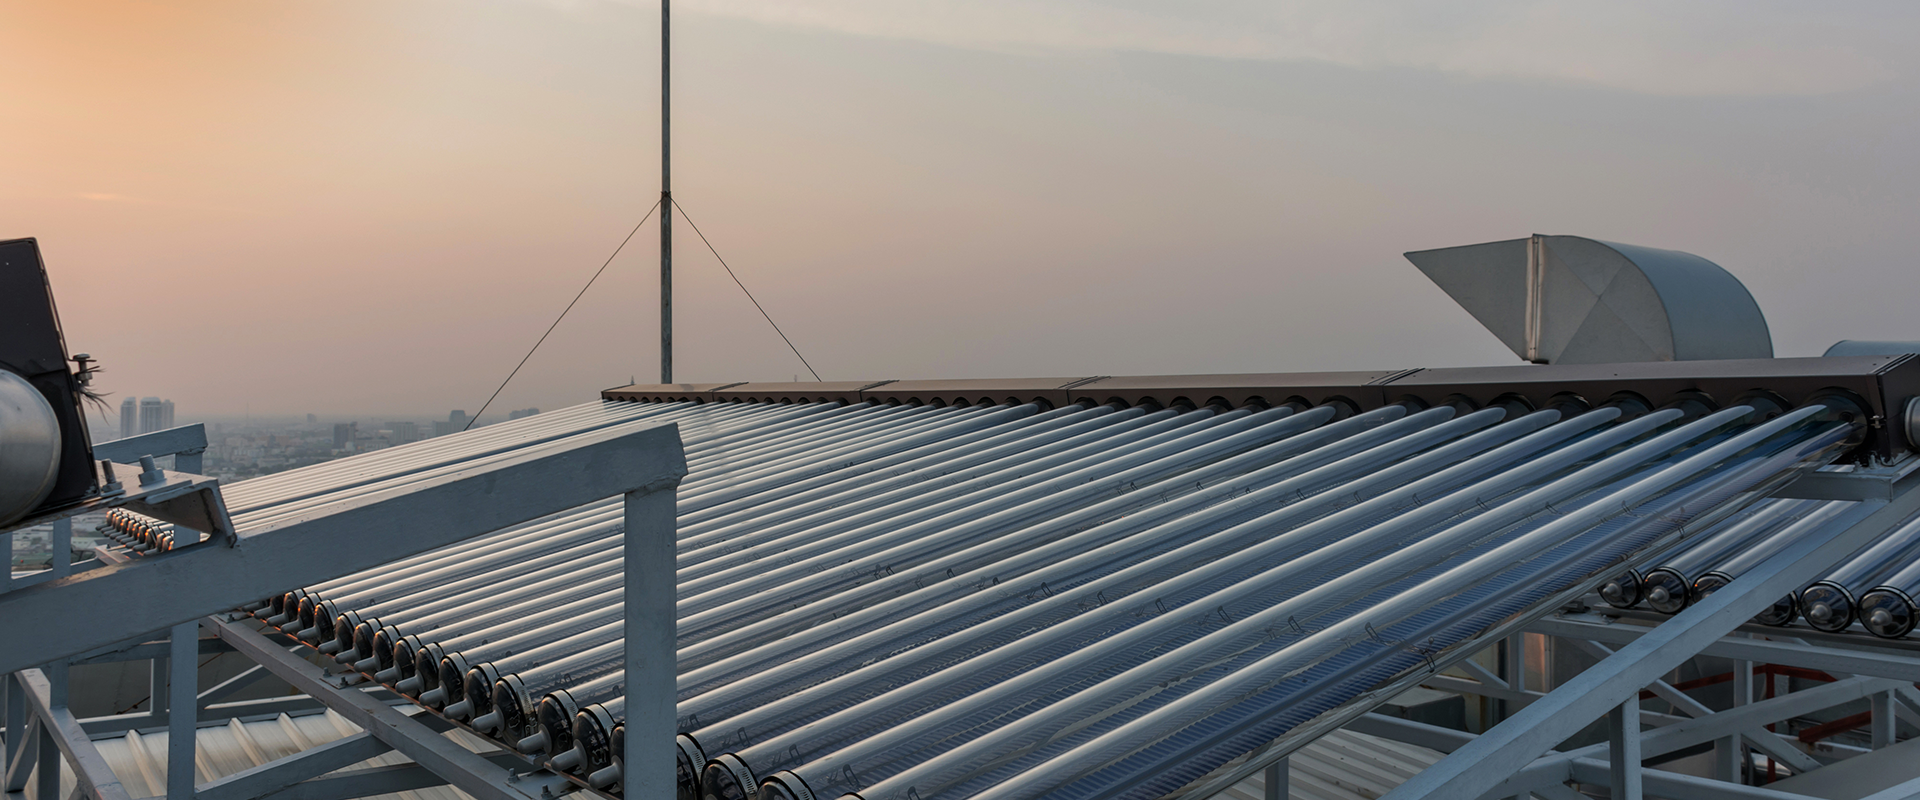 Advantages of solar water heater